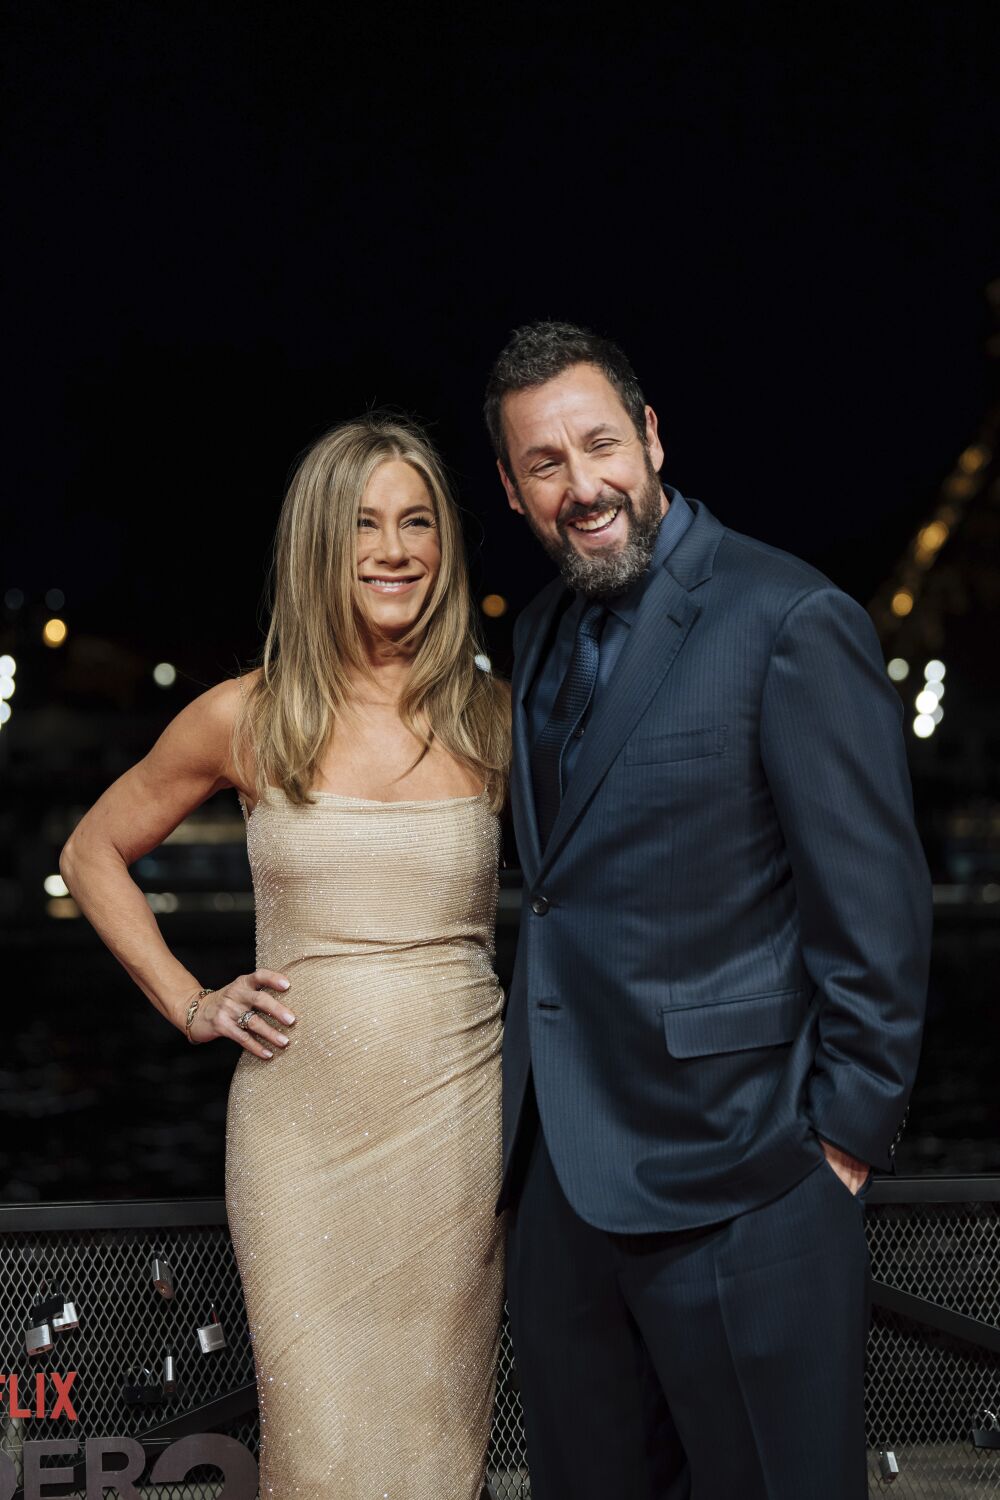 Jennifer Aniston ribs Adam Sandler's Vogue-approved style and his dating advice